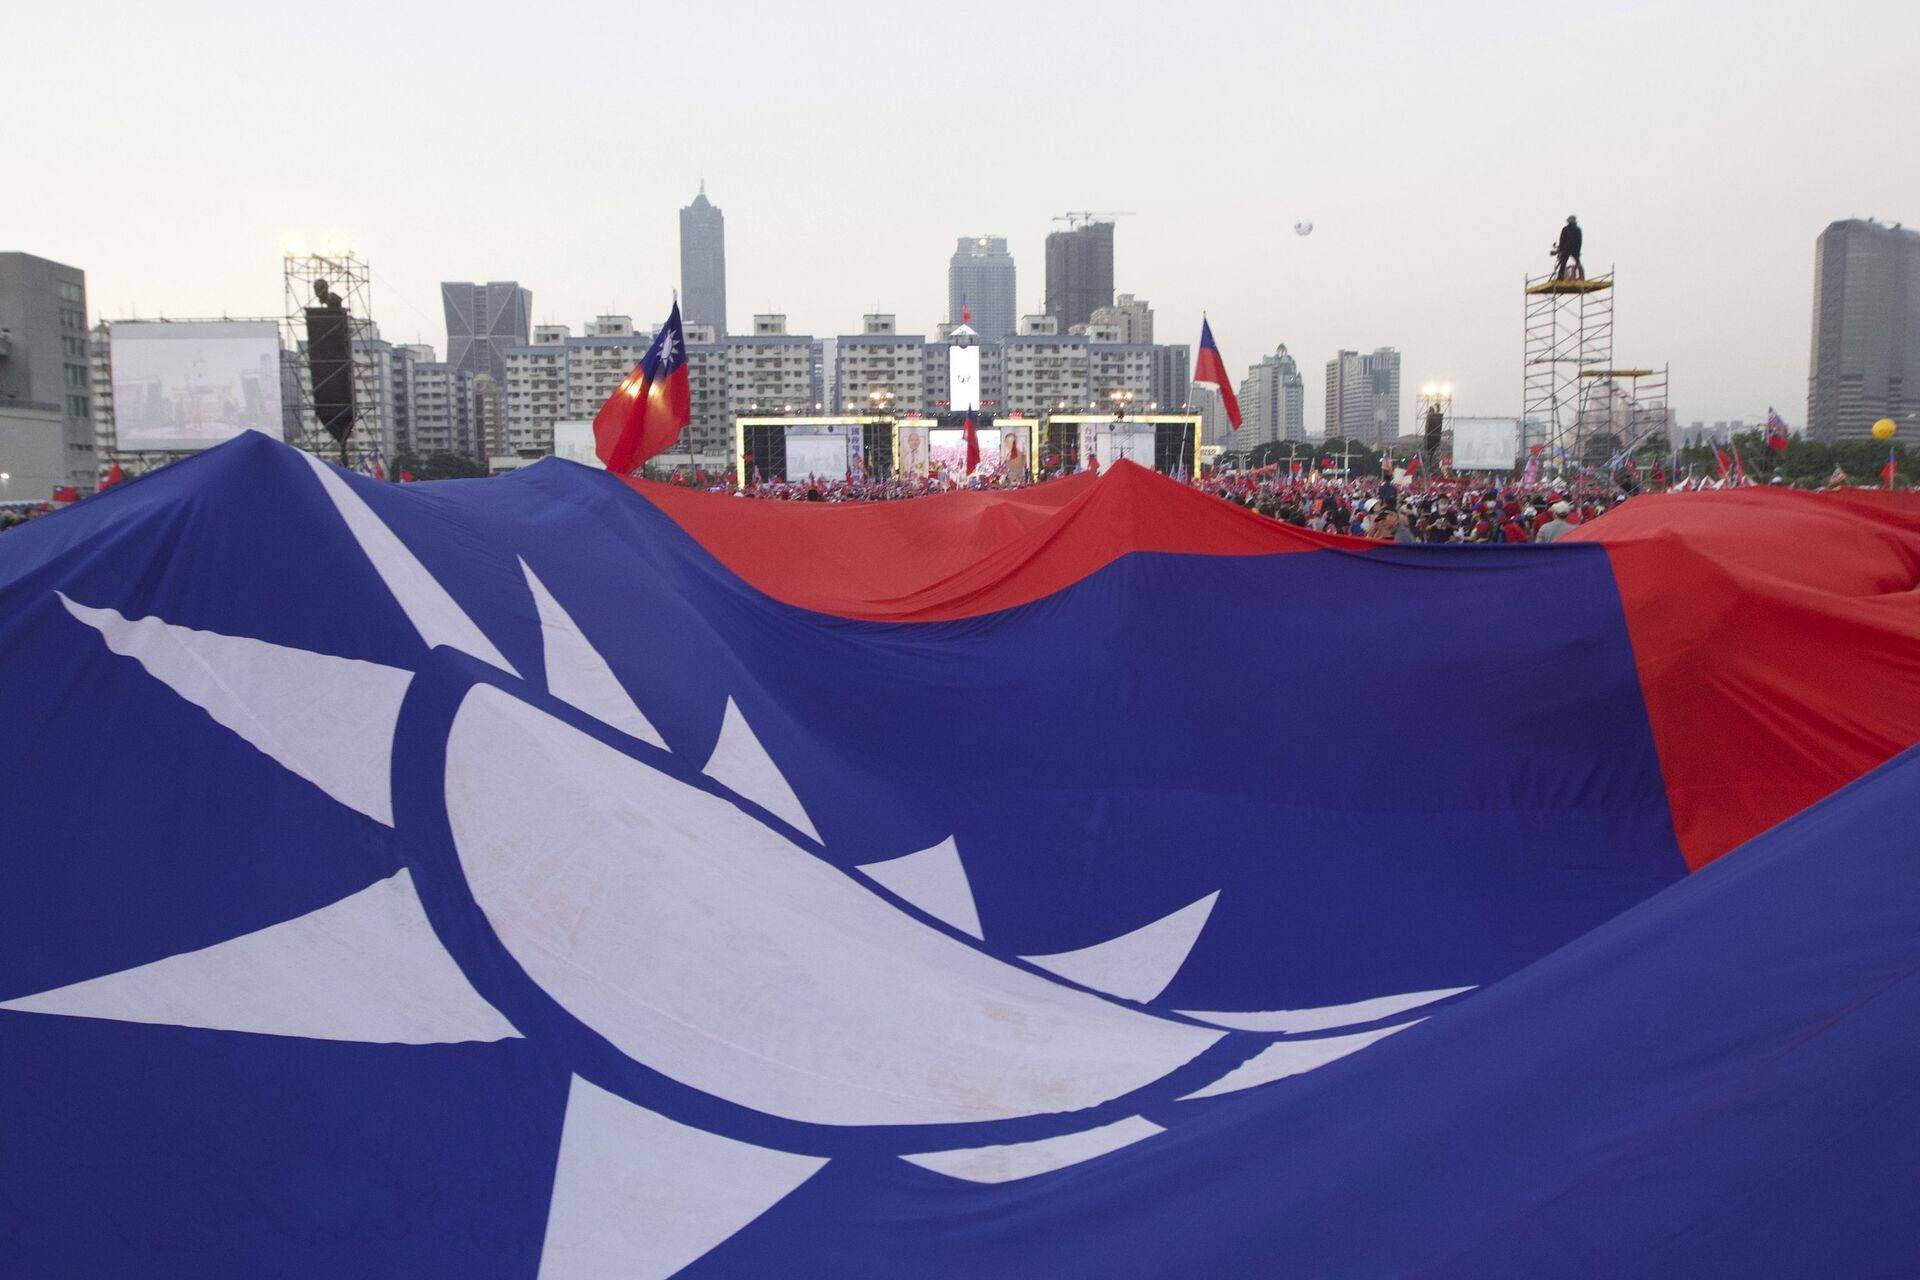 Supporters of Taiwan's 2020 presidential election candidate for the KMT, or Nationalist Party, Han Kuo-yu pass along a giant Taiwanese flag for the start of a campaign rally in southern Taiwan's Kaohsiung city on Friday, Jan 10, 2020 - Sputnik International, 1920, 05.11.2021